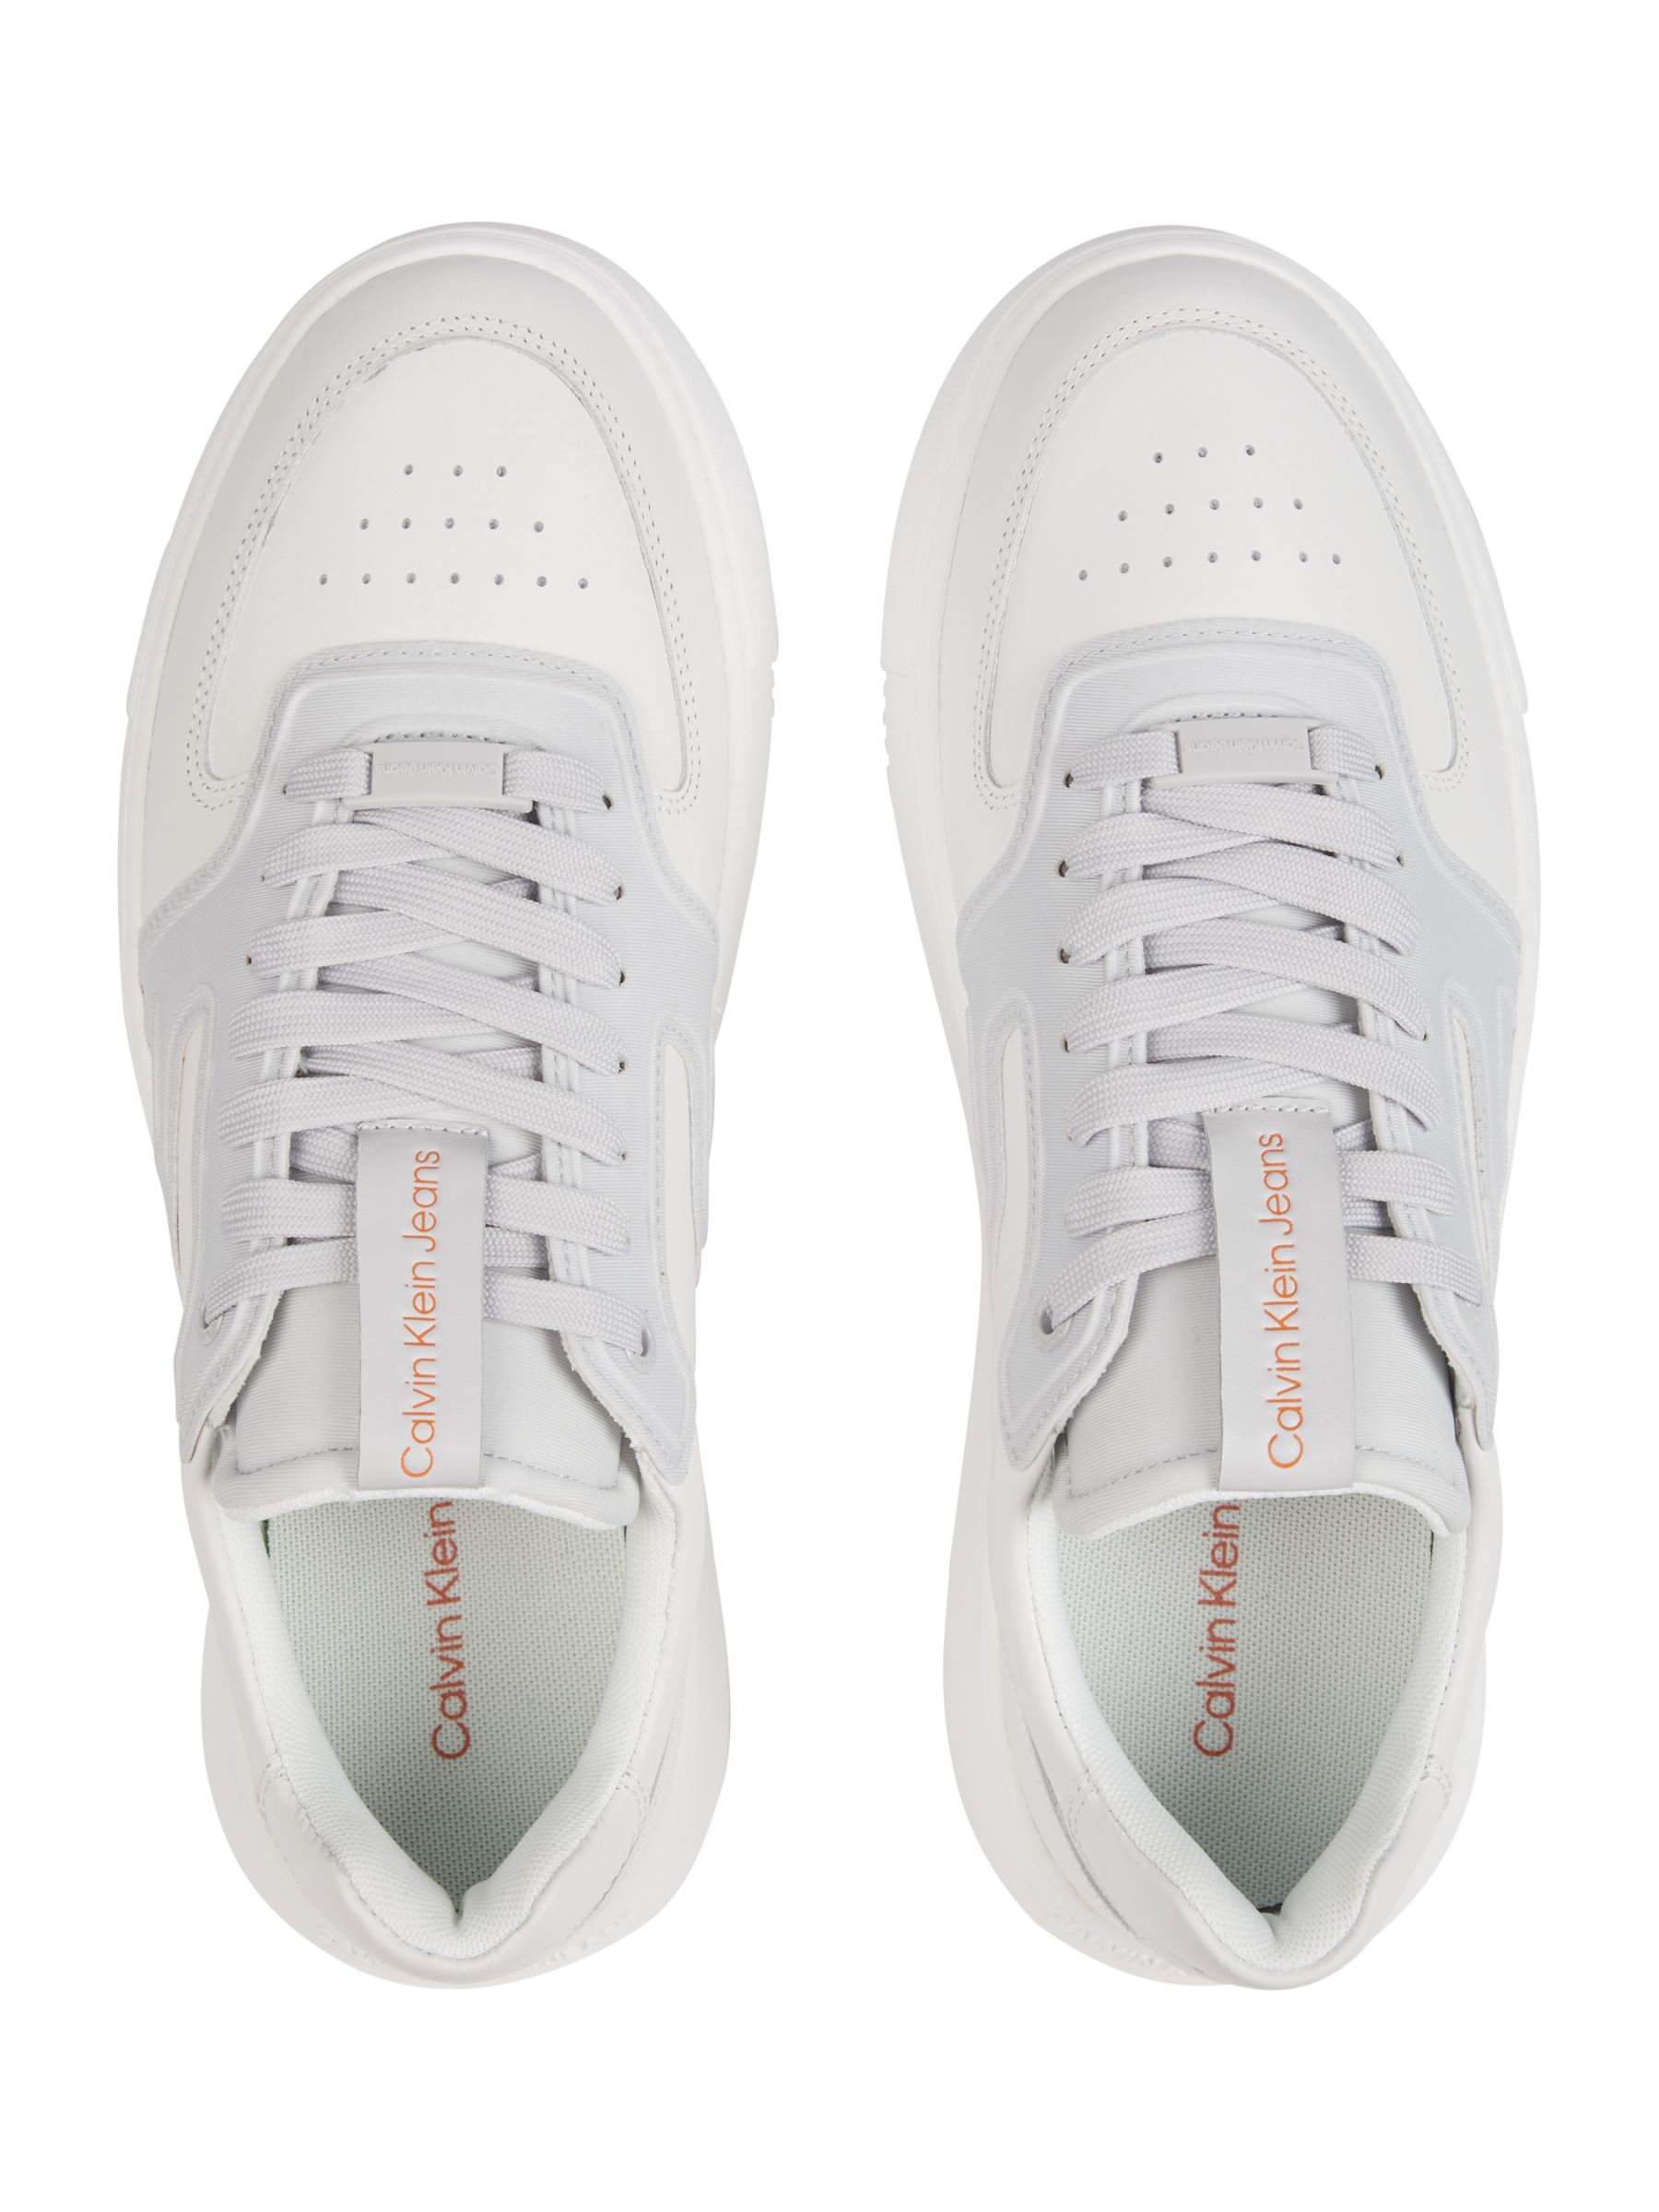 Buy Calvin Klein Leather Lace Up Chunky Cupsole Trainers, White/Oyster Online at johnlewis.com